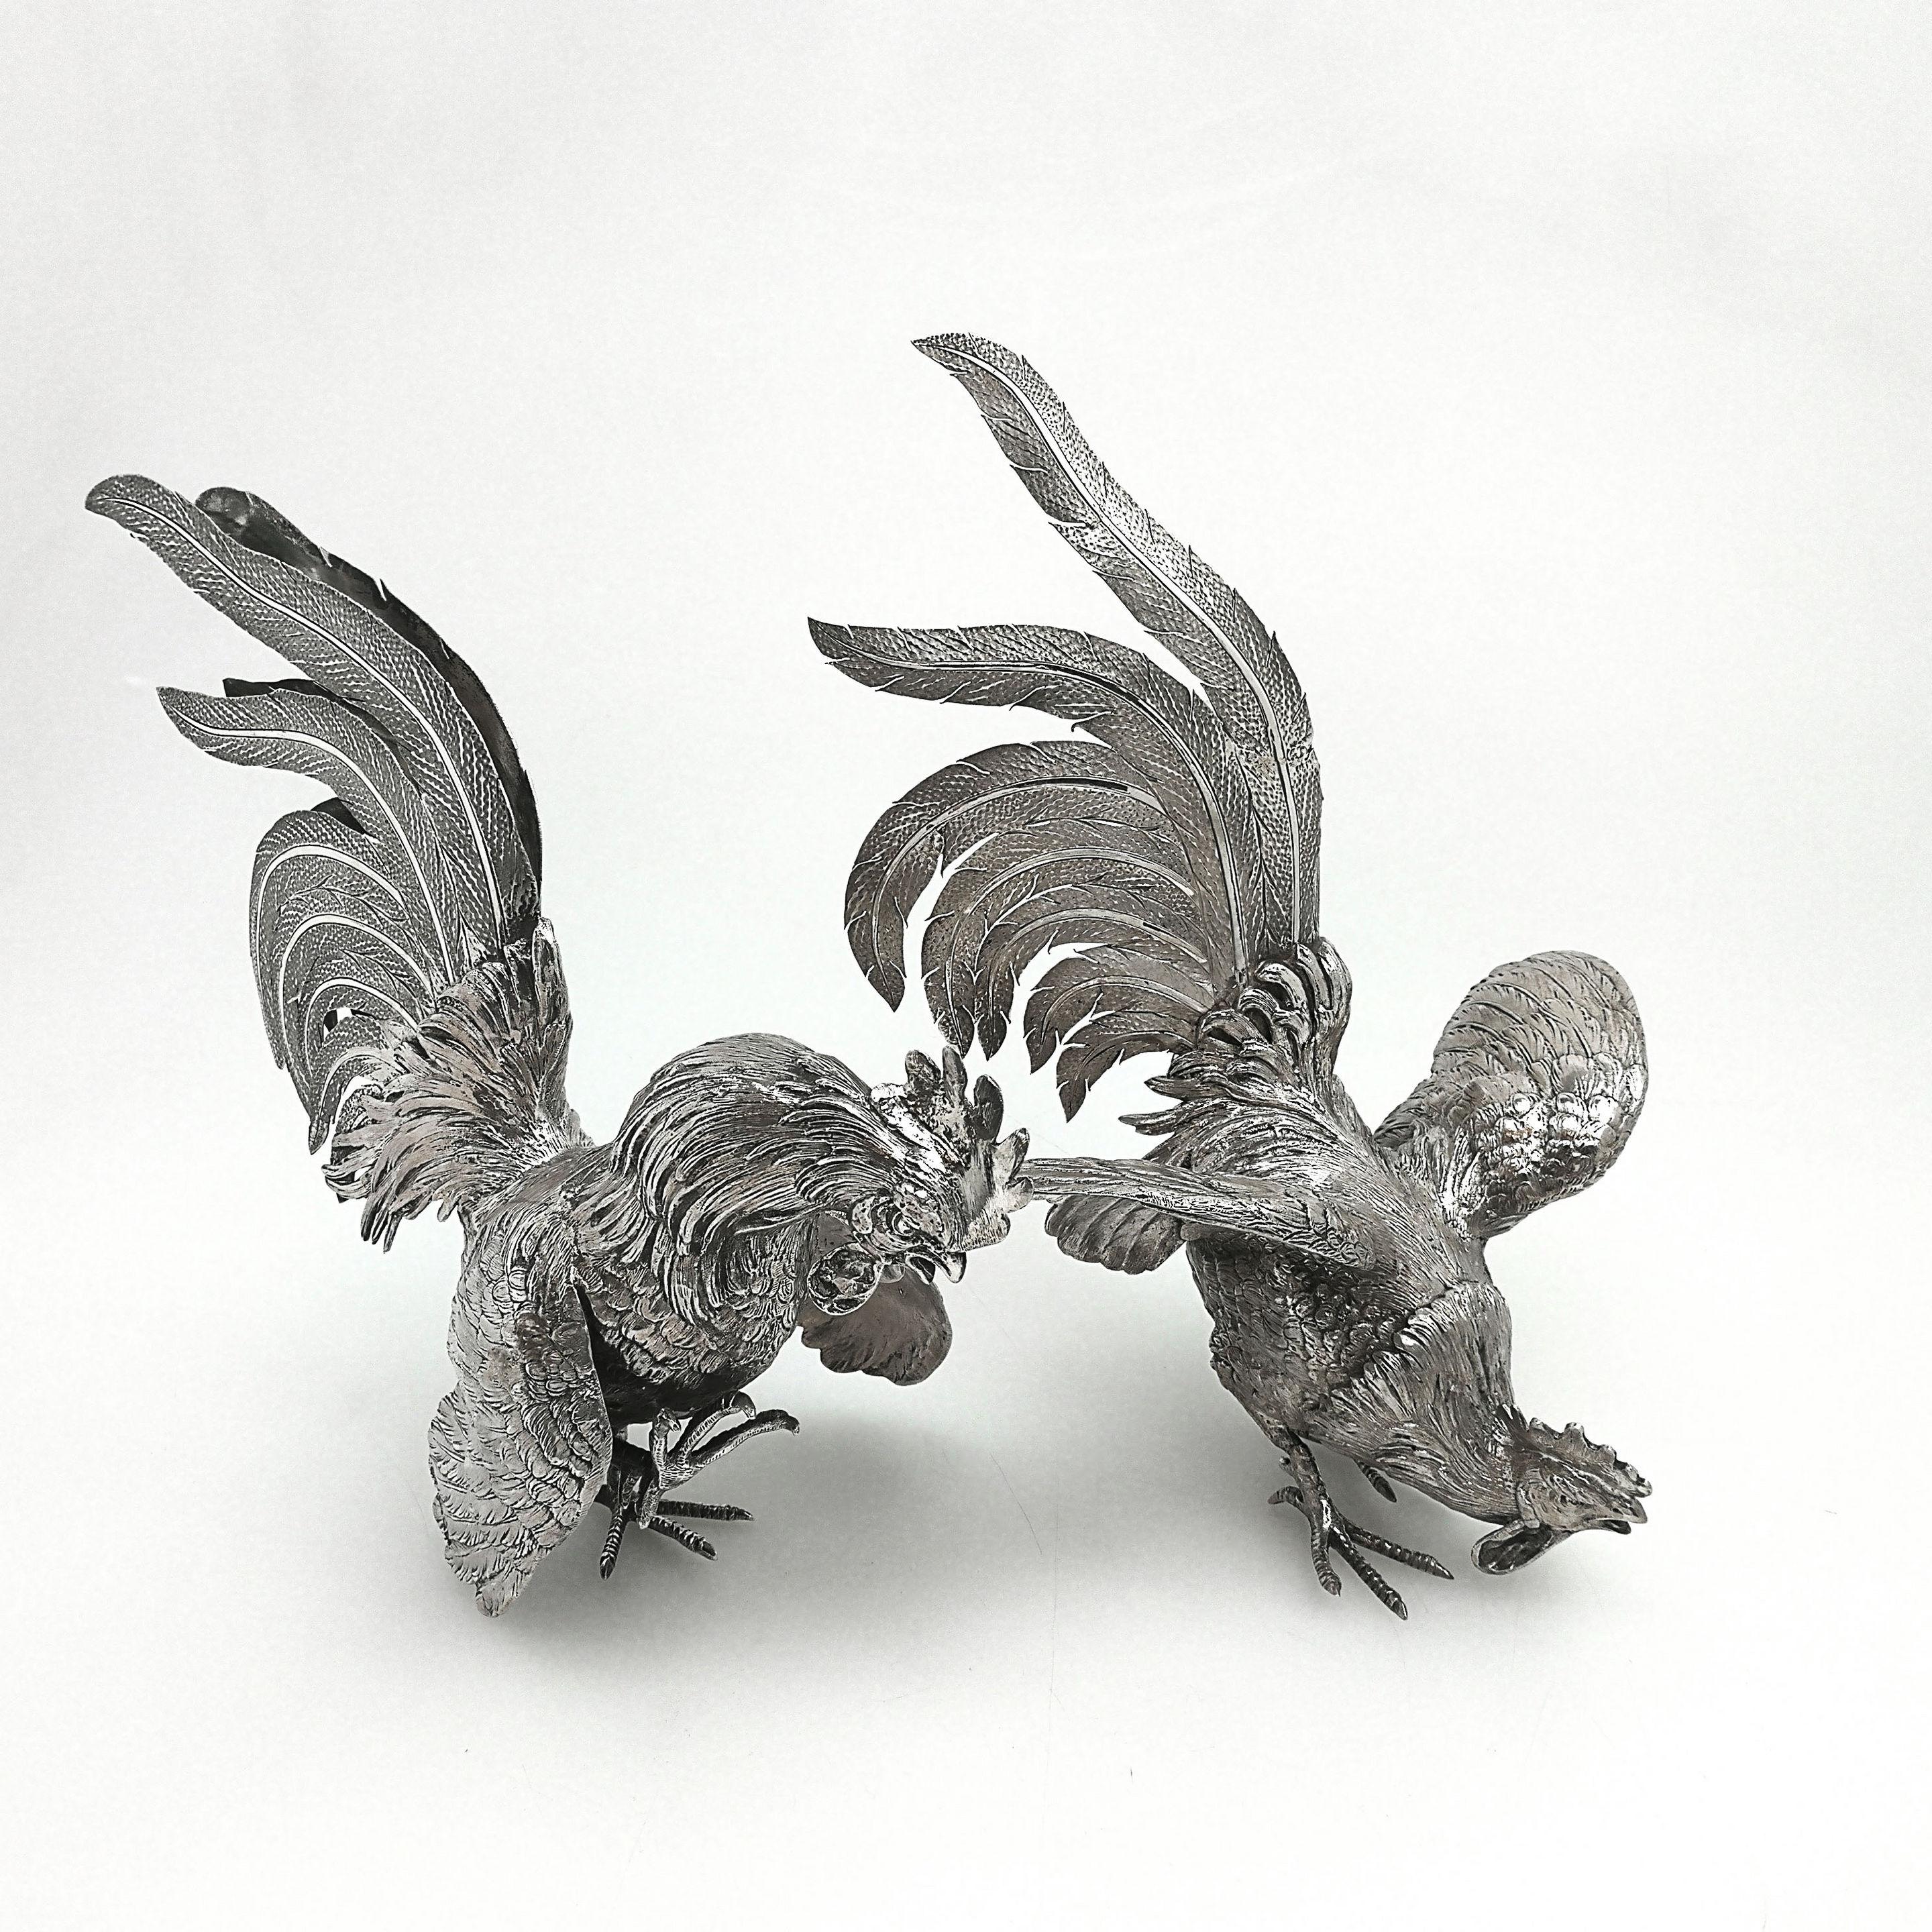 Pair of vintage solid silver table decorations in the shape of cockerels / roosters in an attitude of fighting. These fighting cockerels are created with a wonderful attention to detail with close attention paid to the feathers and plumage. Both